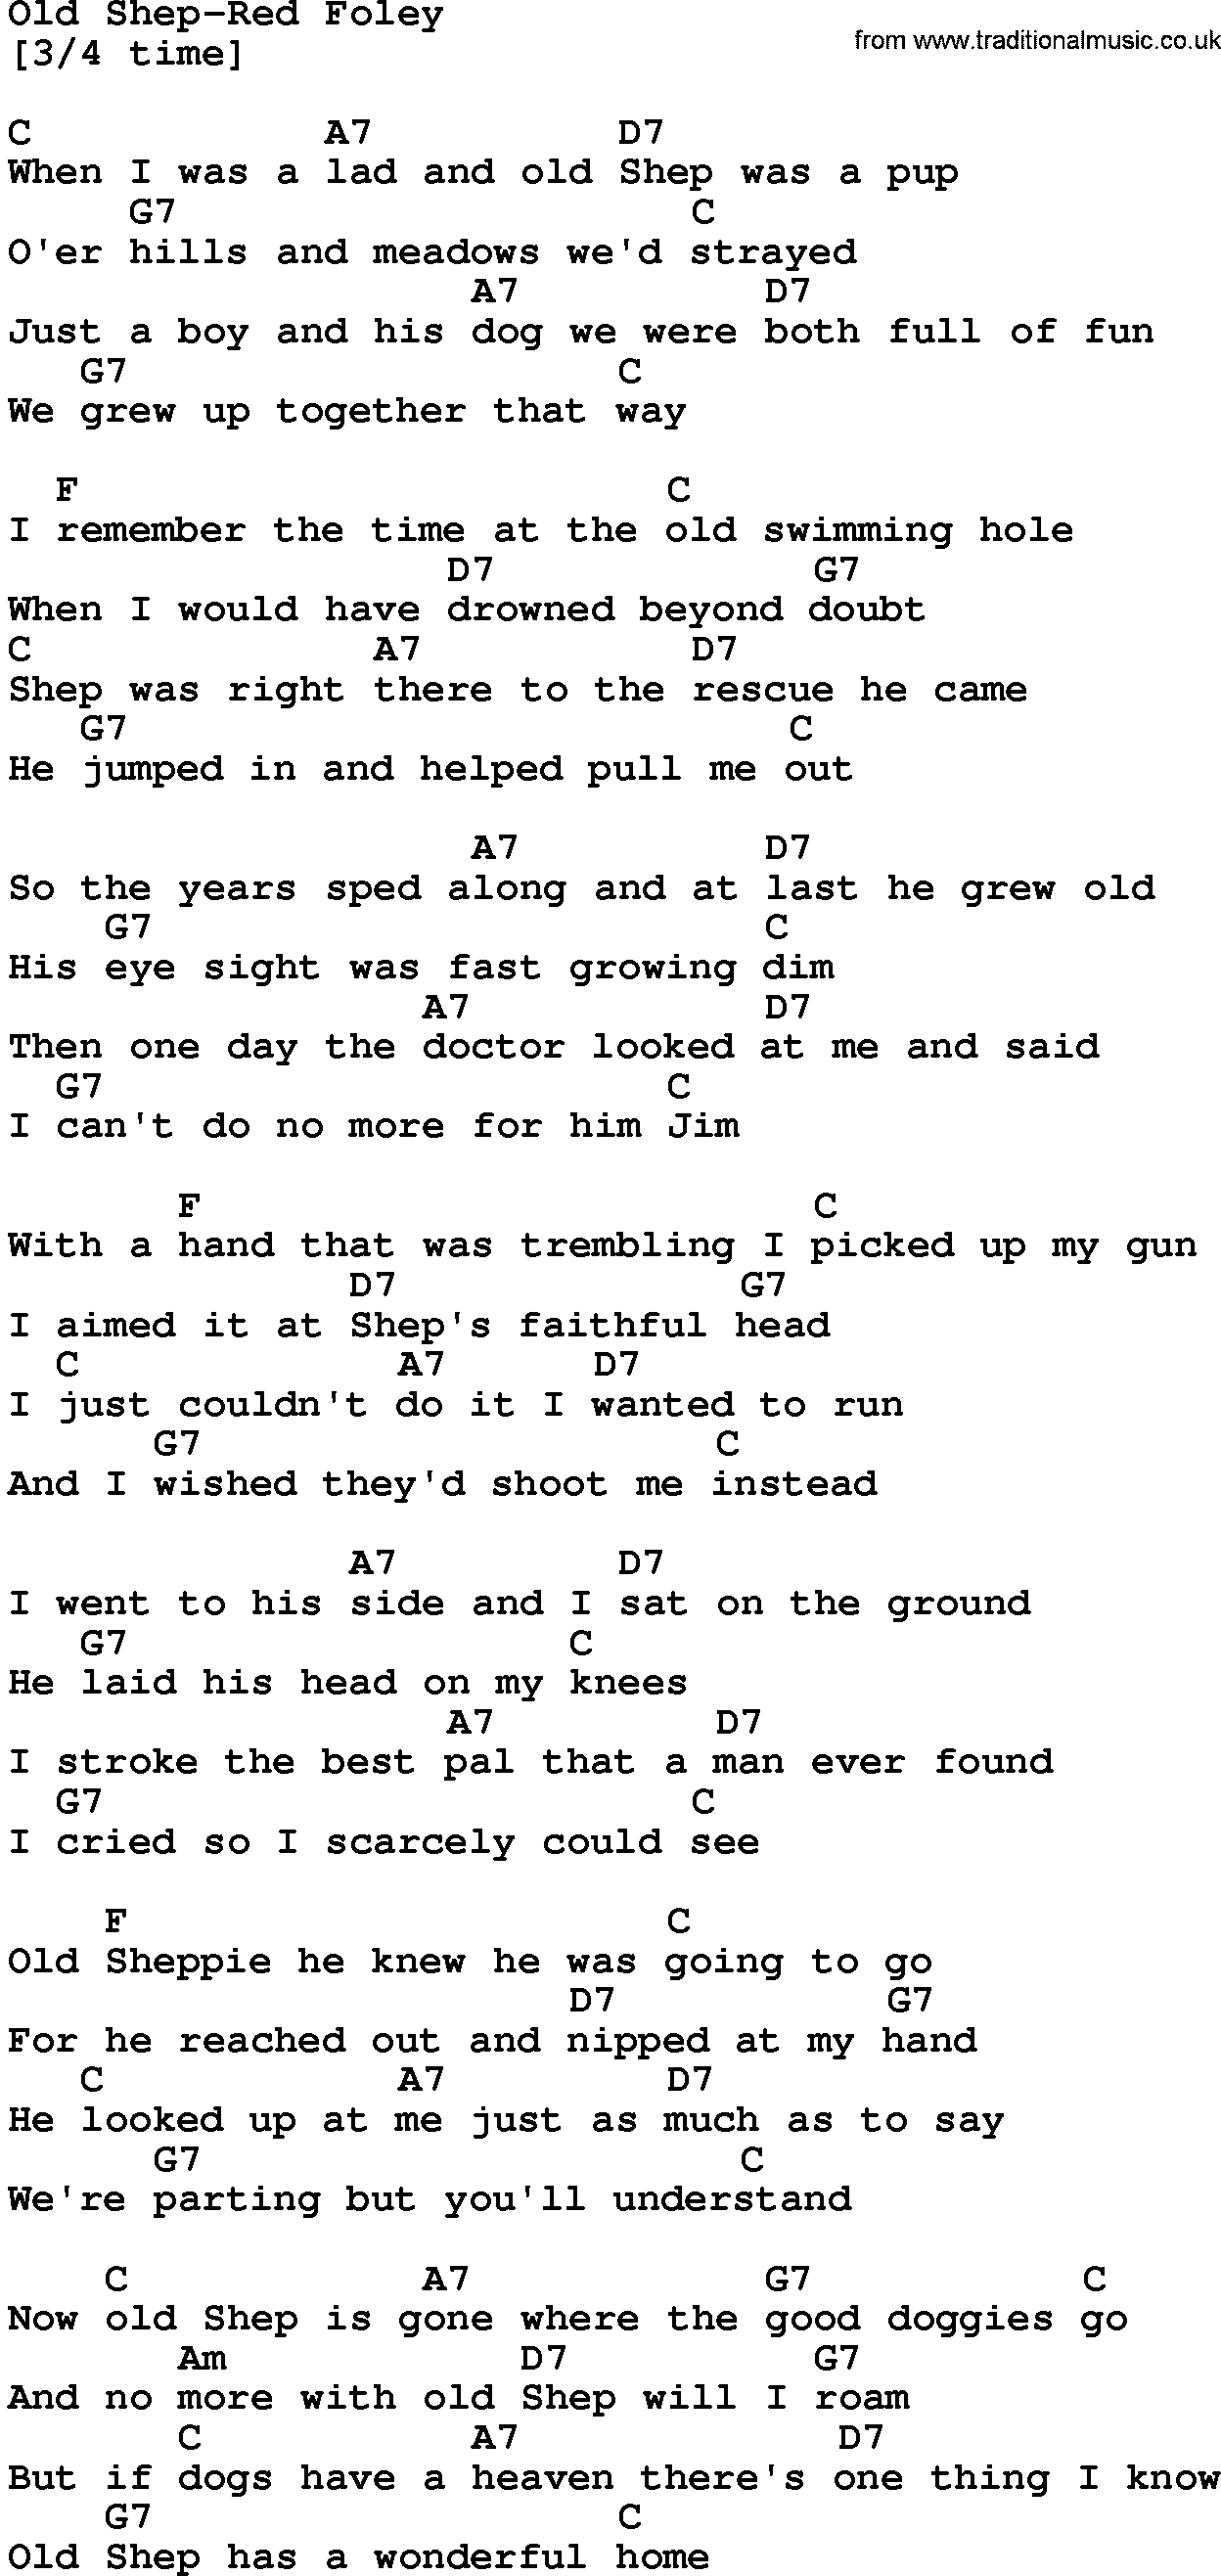 Country music song: Old Shep-Red Foley lyrics and chords